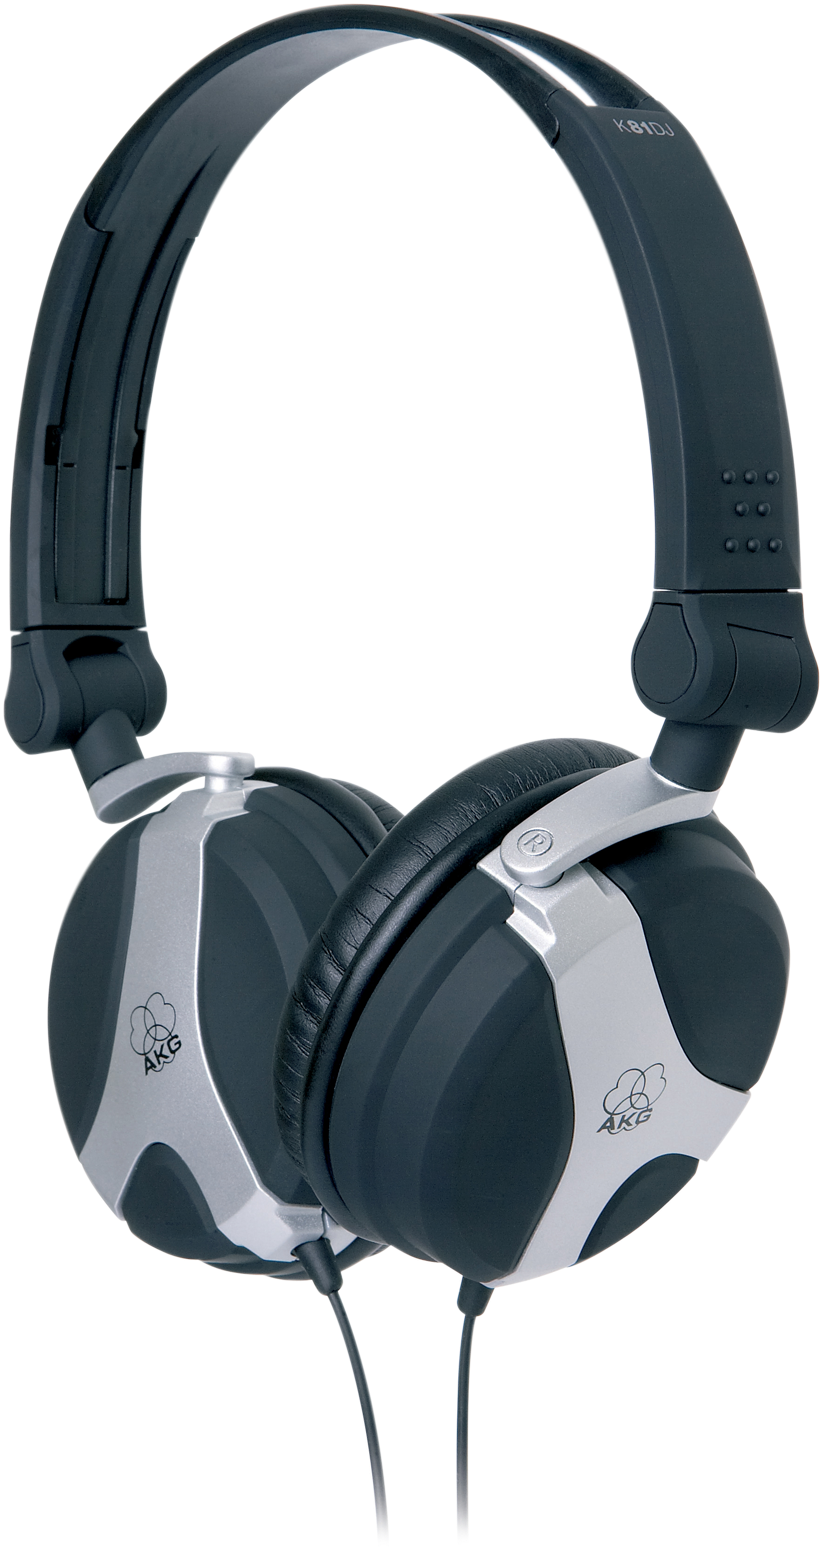 A Pair Of Headphones With A Black Background